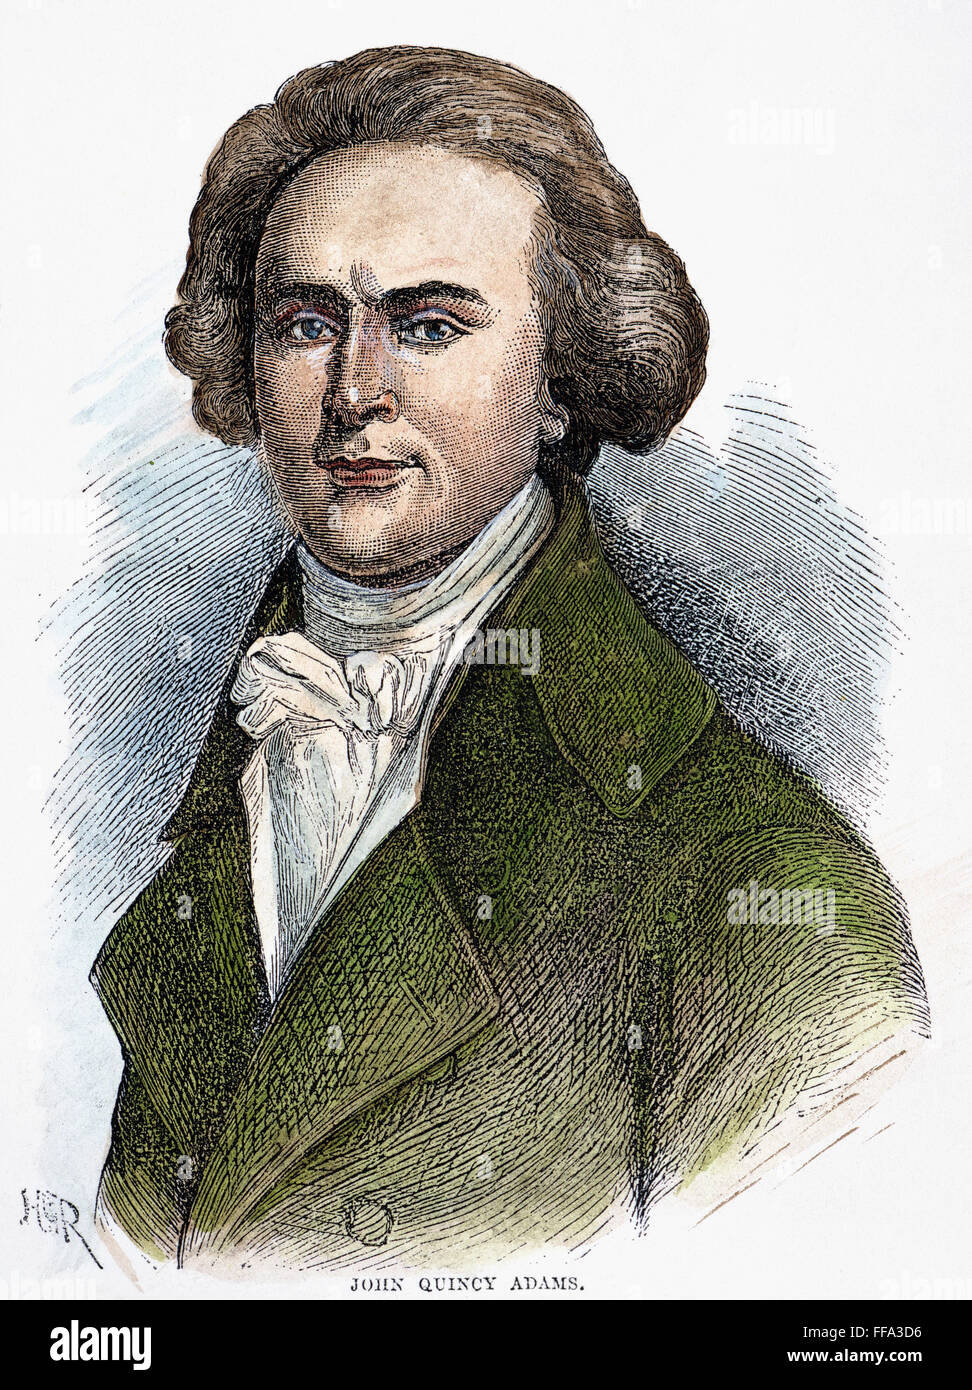 JOHN QUINCY ADAMS /n(1767-1848). 6th President of the United States. Wood engraving, 19th century. Stock Photo